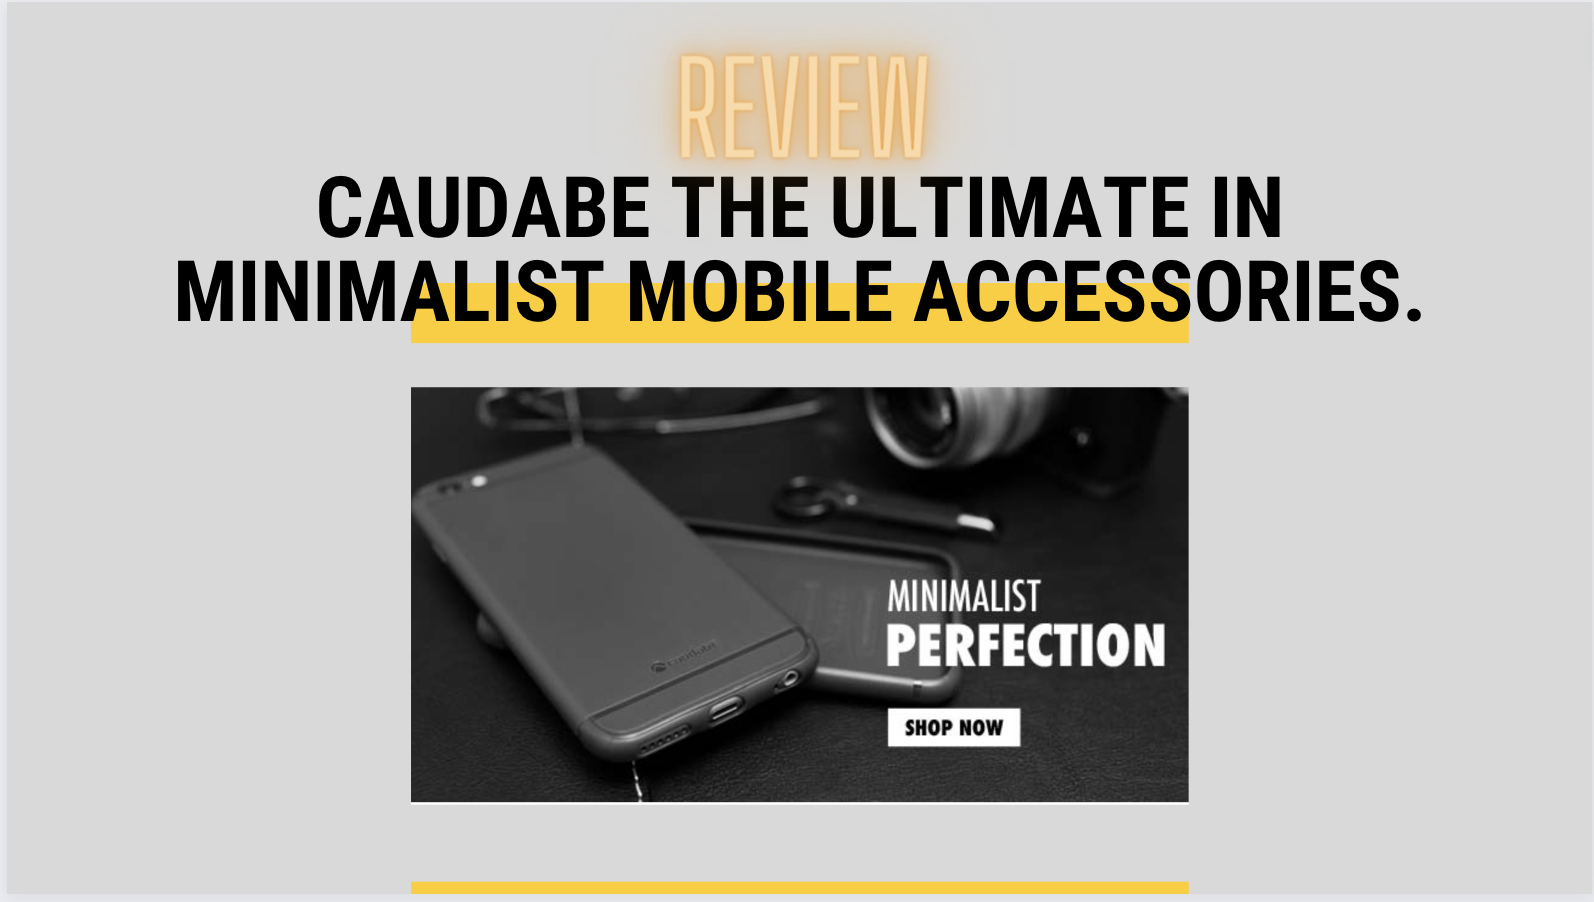 Caudabe The Ultimate in Minimalist Mobile Accessories